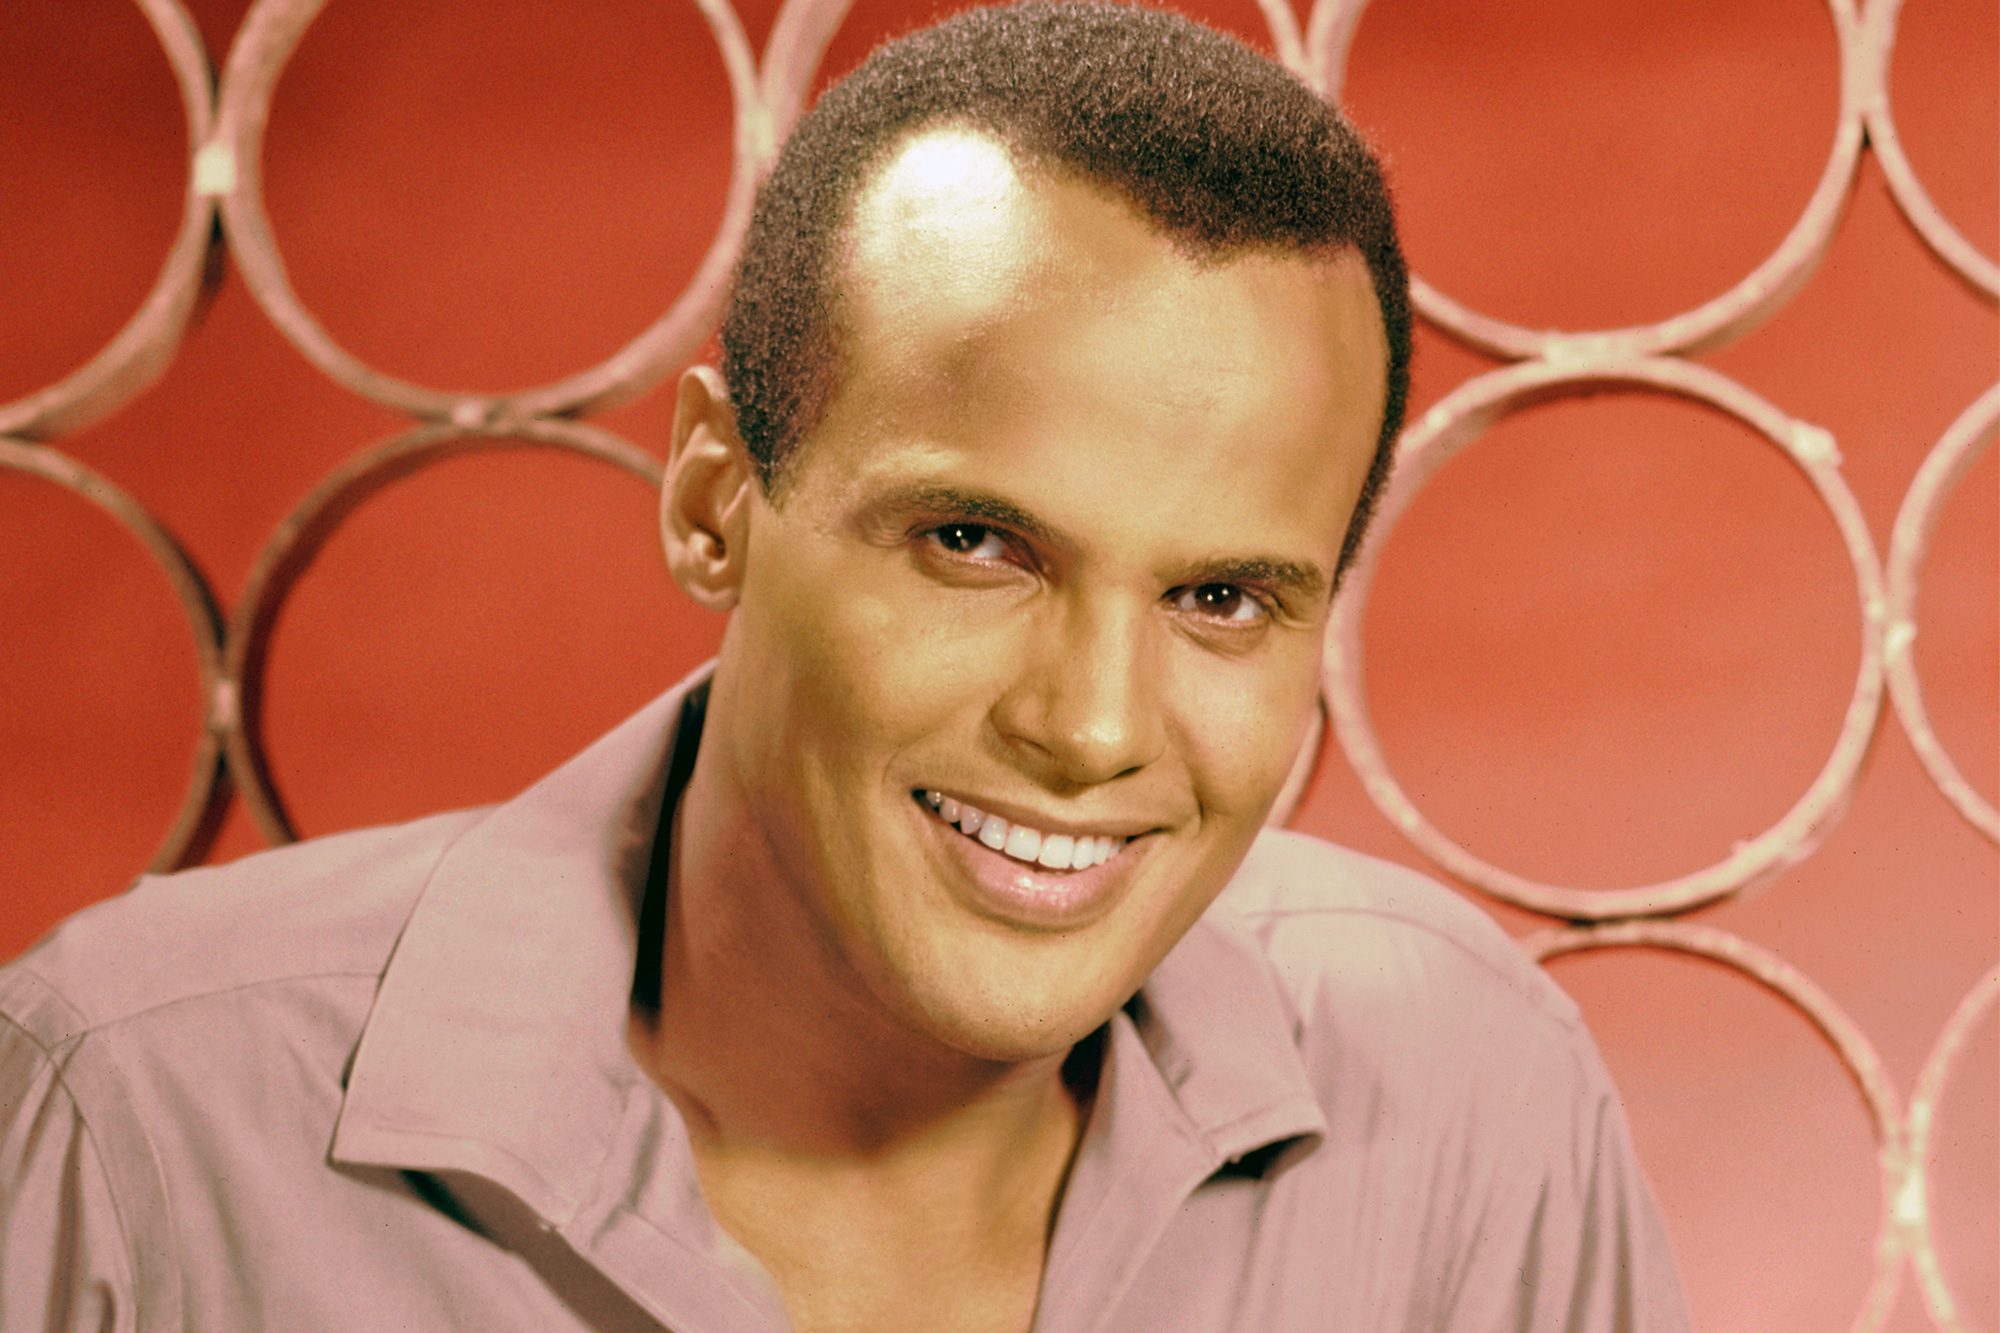 Harry Belafonte, an iconic singer, actor, and advocate for civil rights, has passed away at the age of 96.